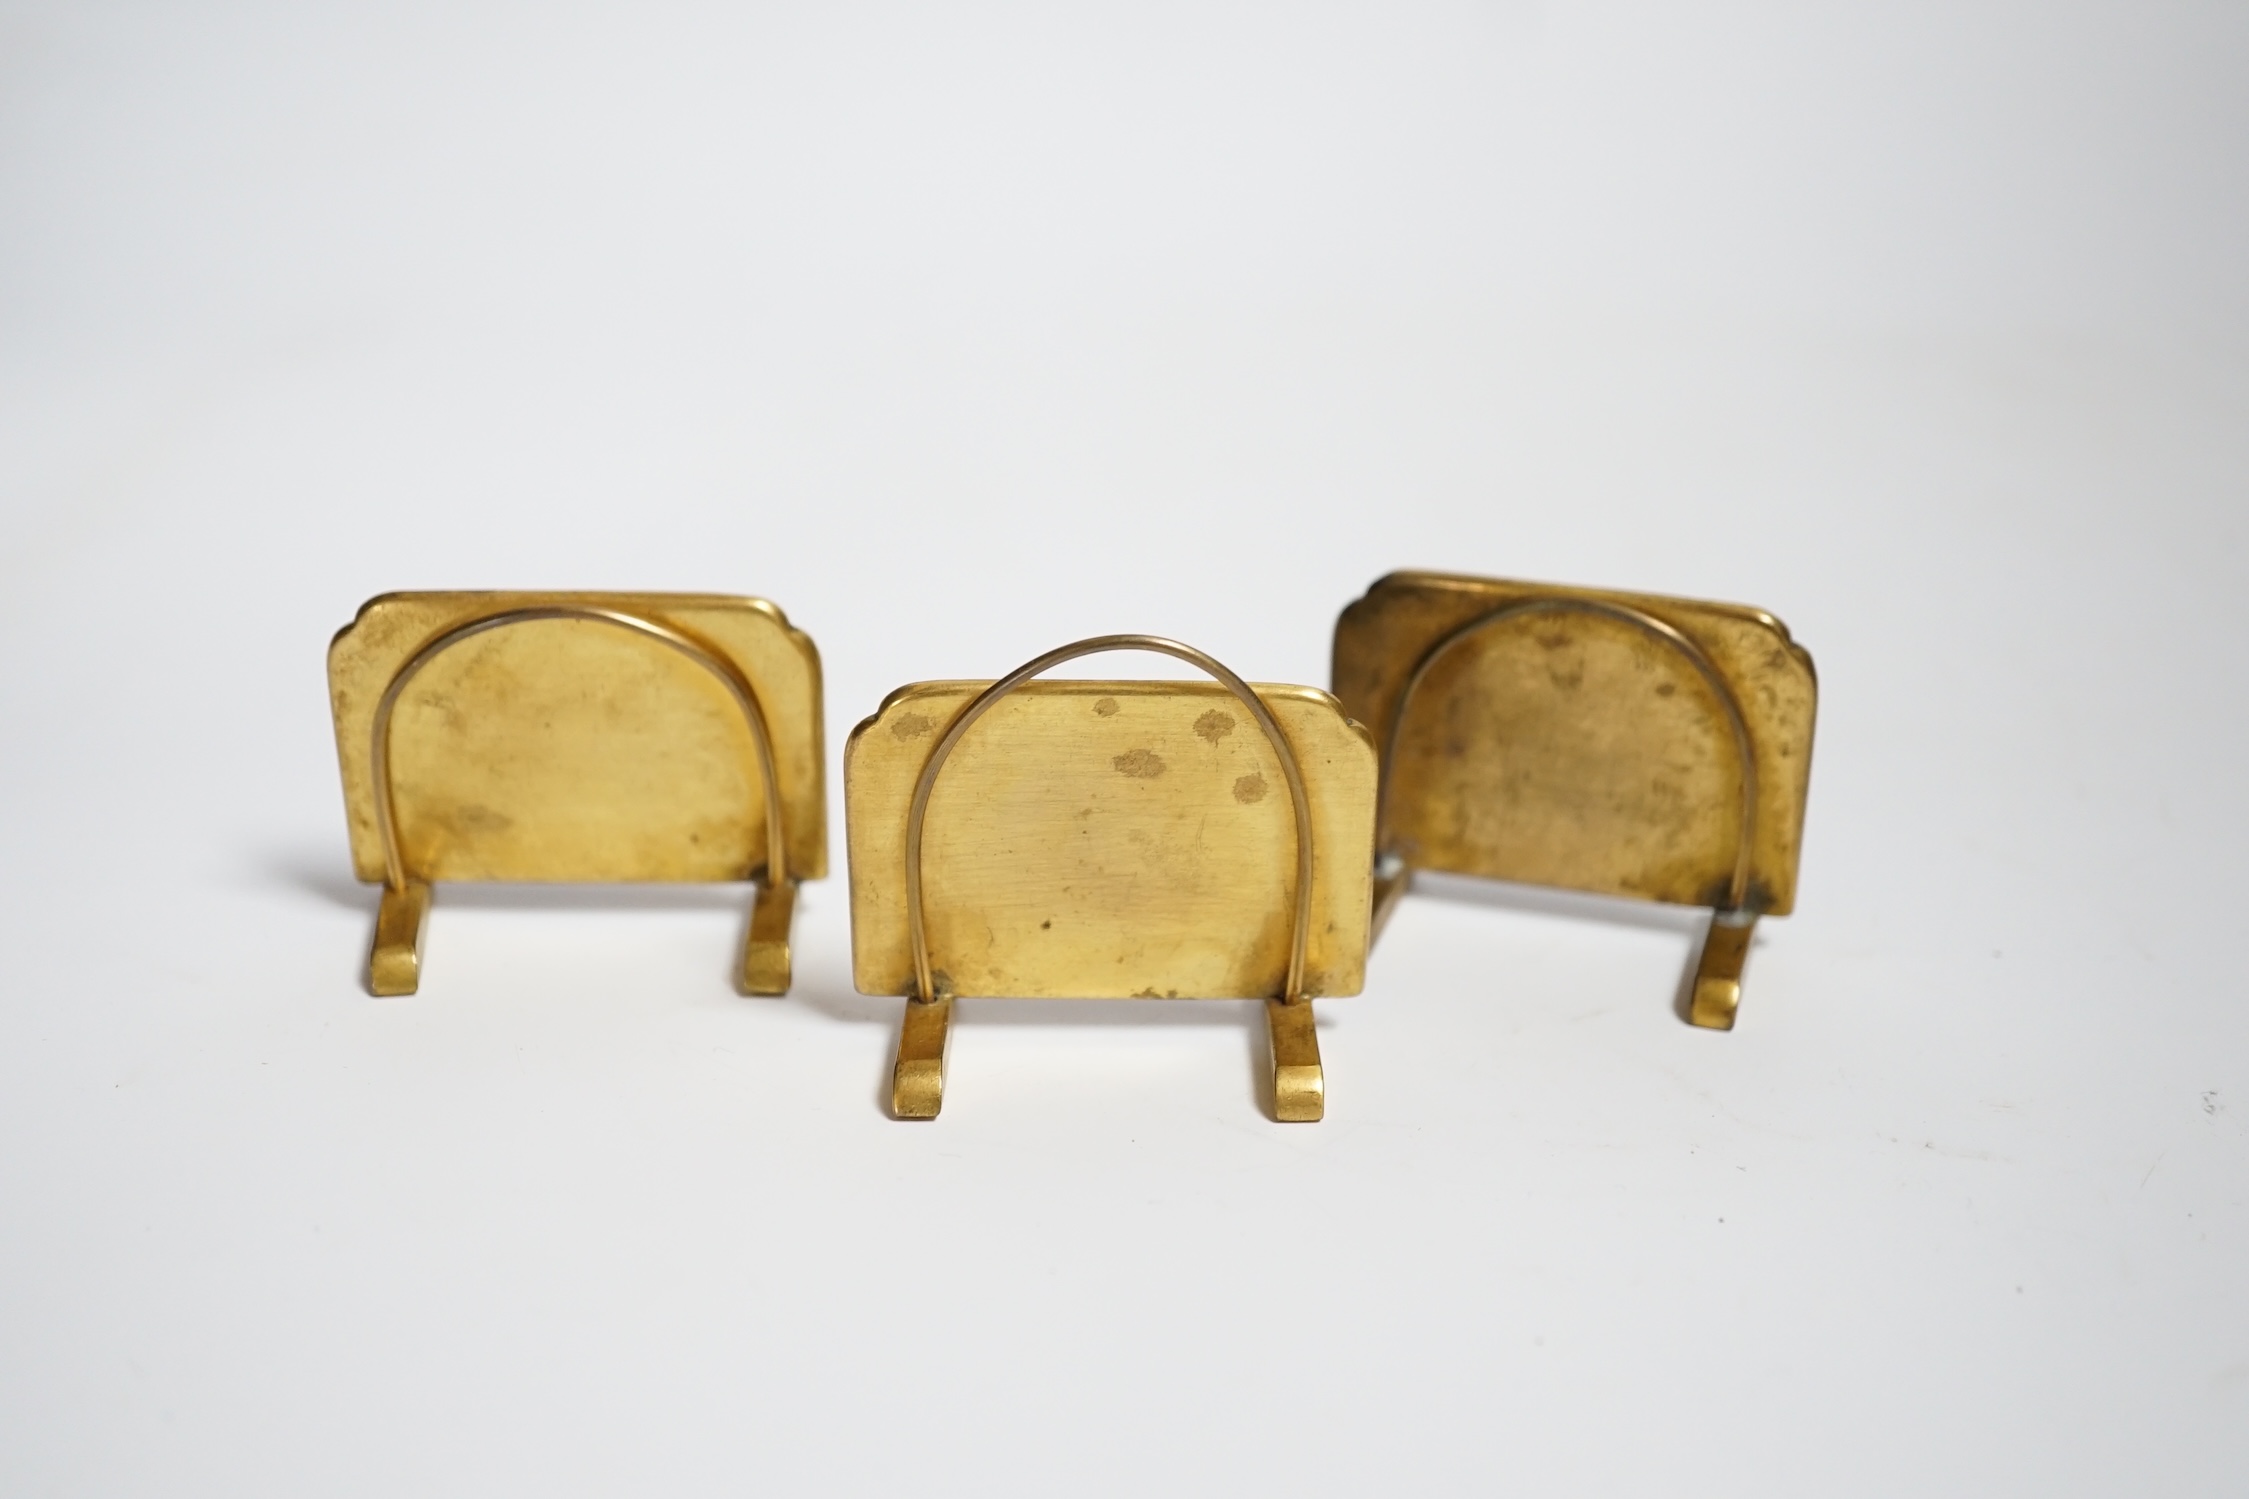 Three Japanese gold damascened iron menu holders by S. Komai, in original box, each 5cm wide - Image 5 of 5